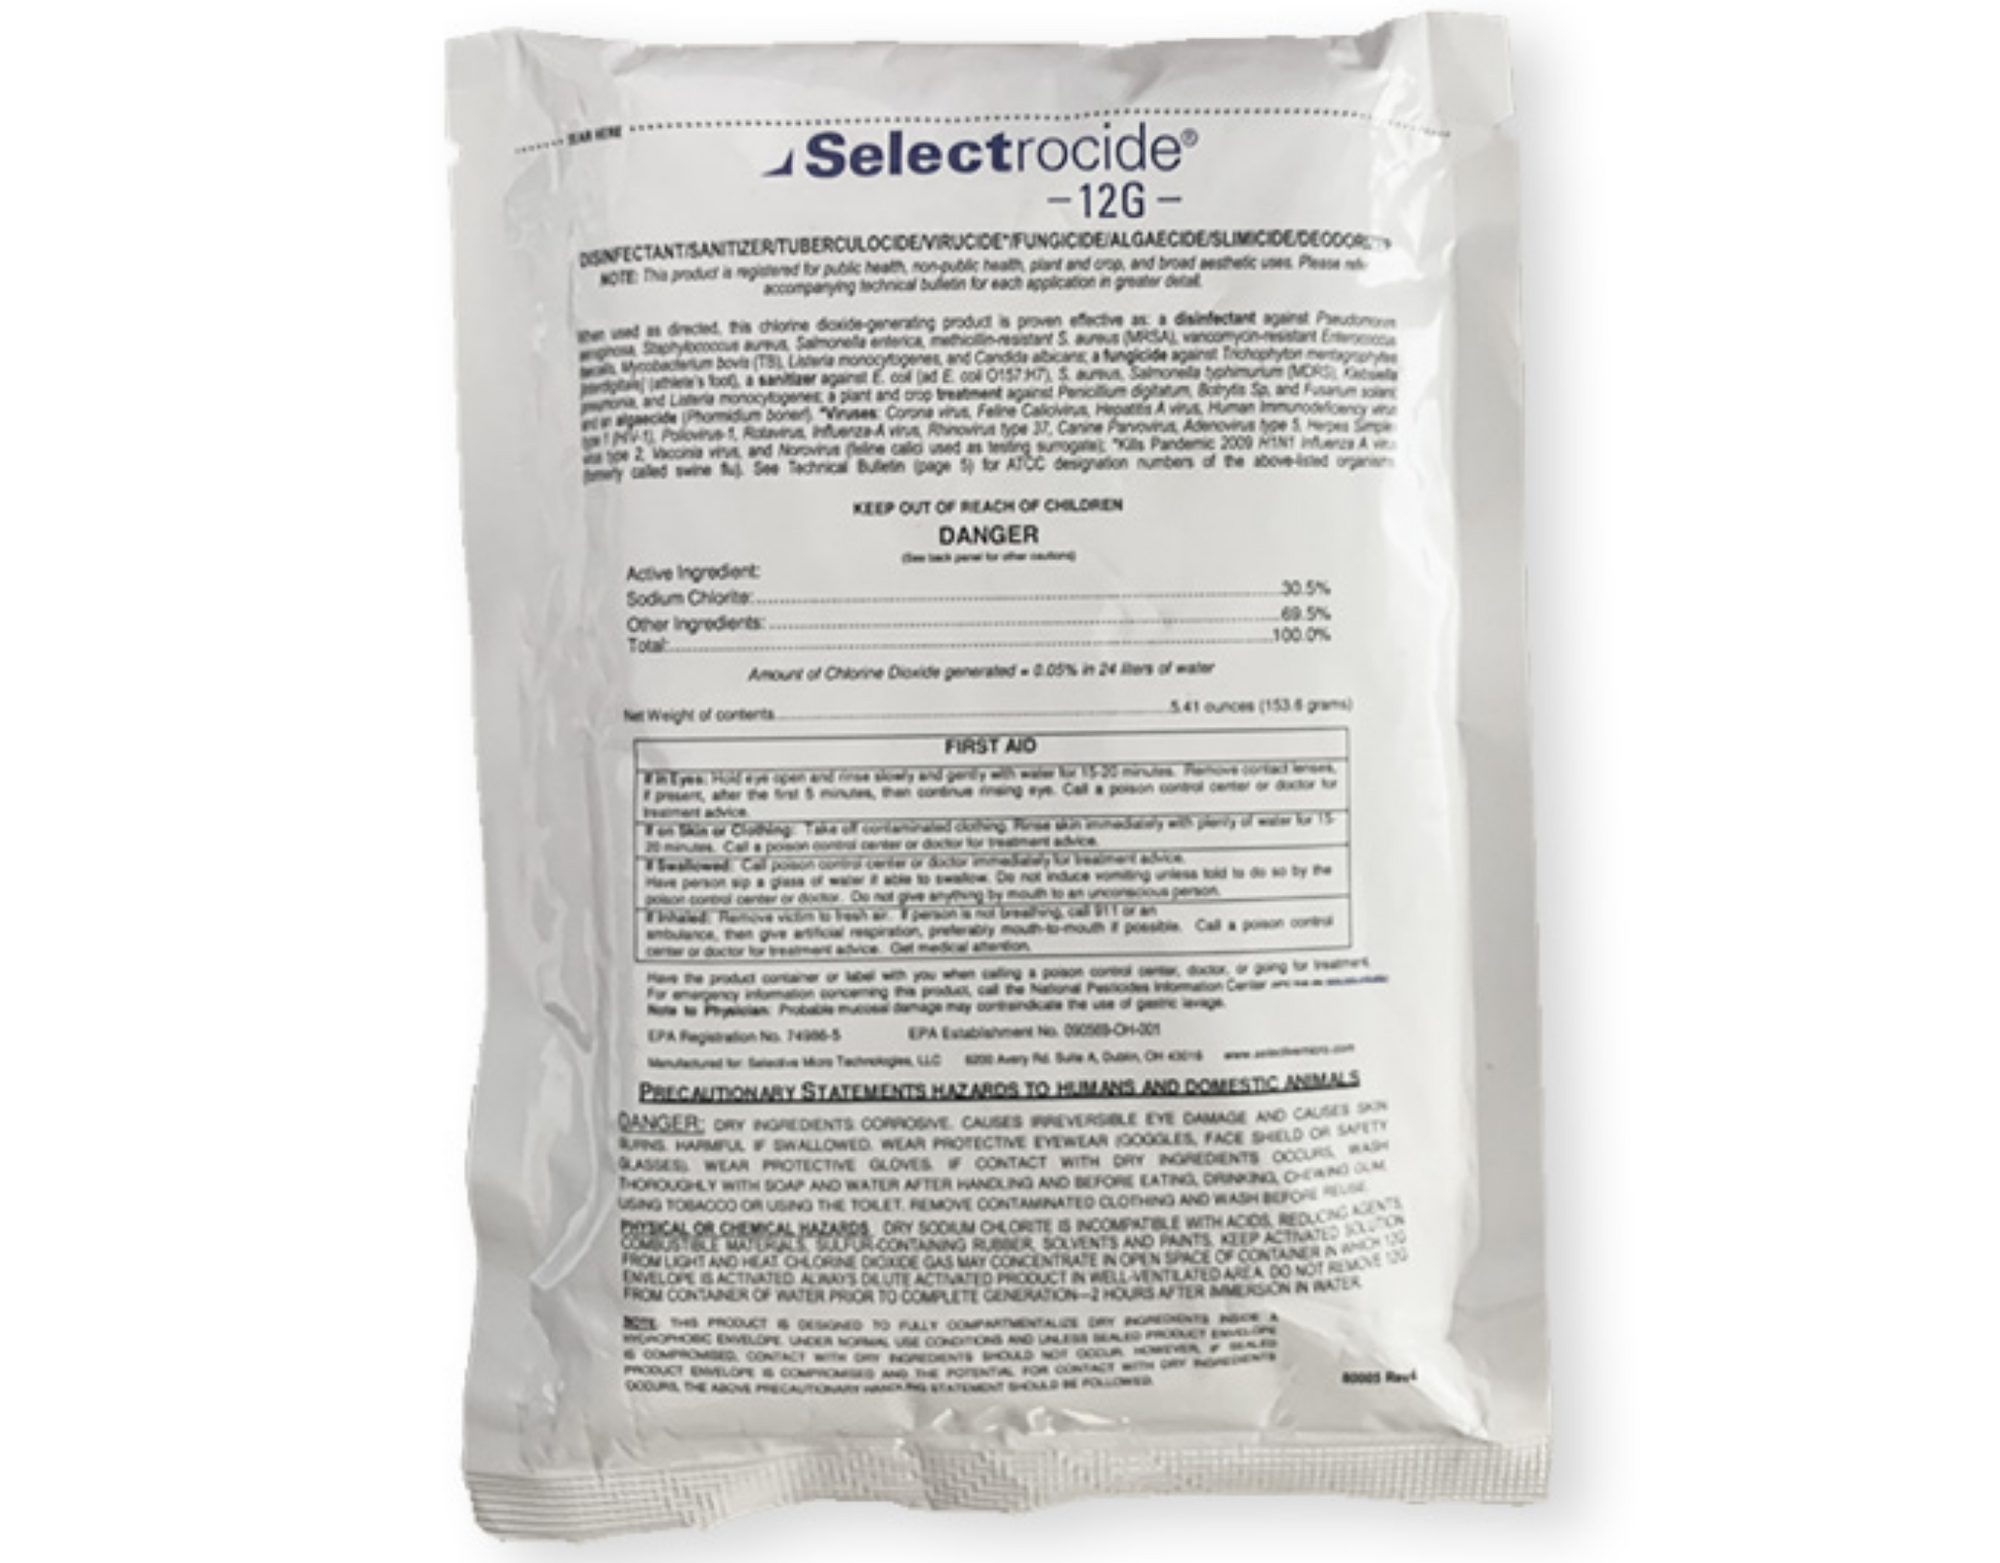 Buy Selectrocide 12G Chlorine Dioxide Disinfectant For Sale from TrustedSafe.com Ingredients on Label